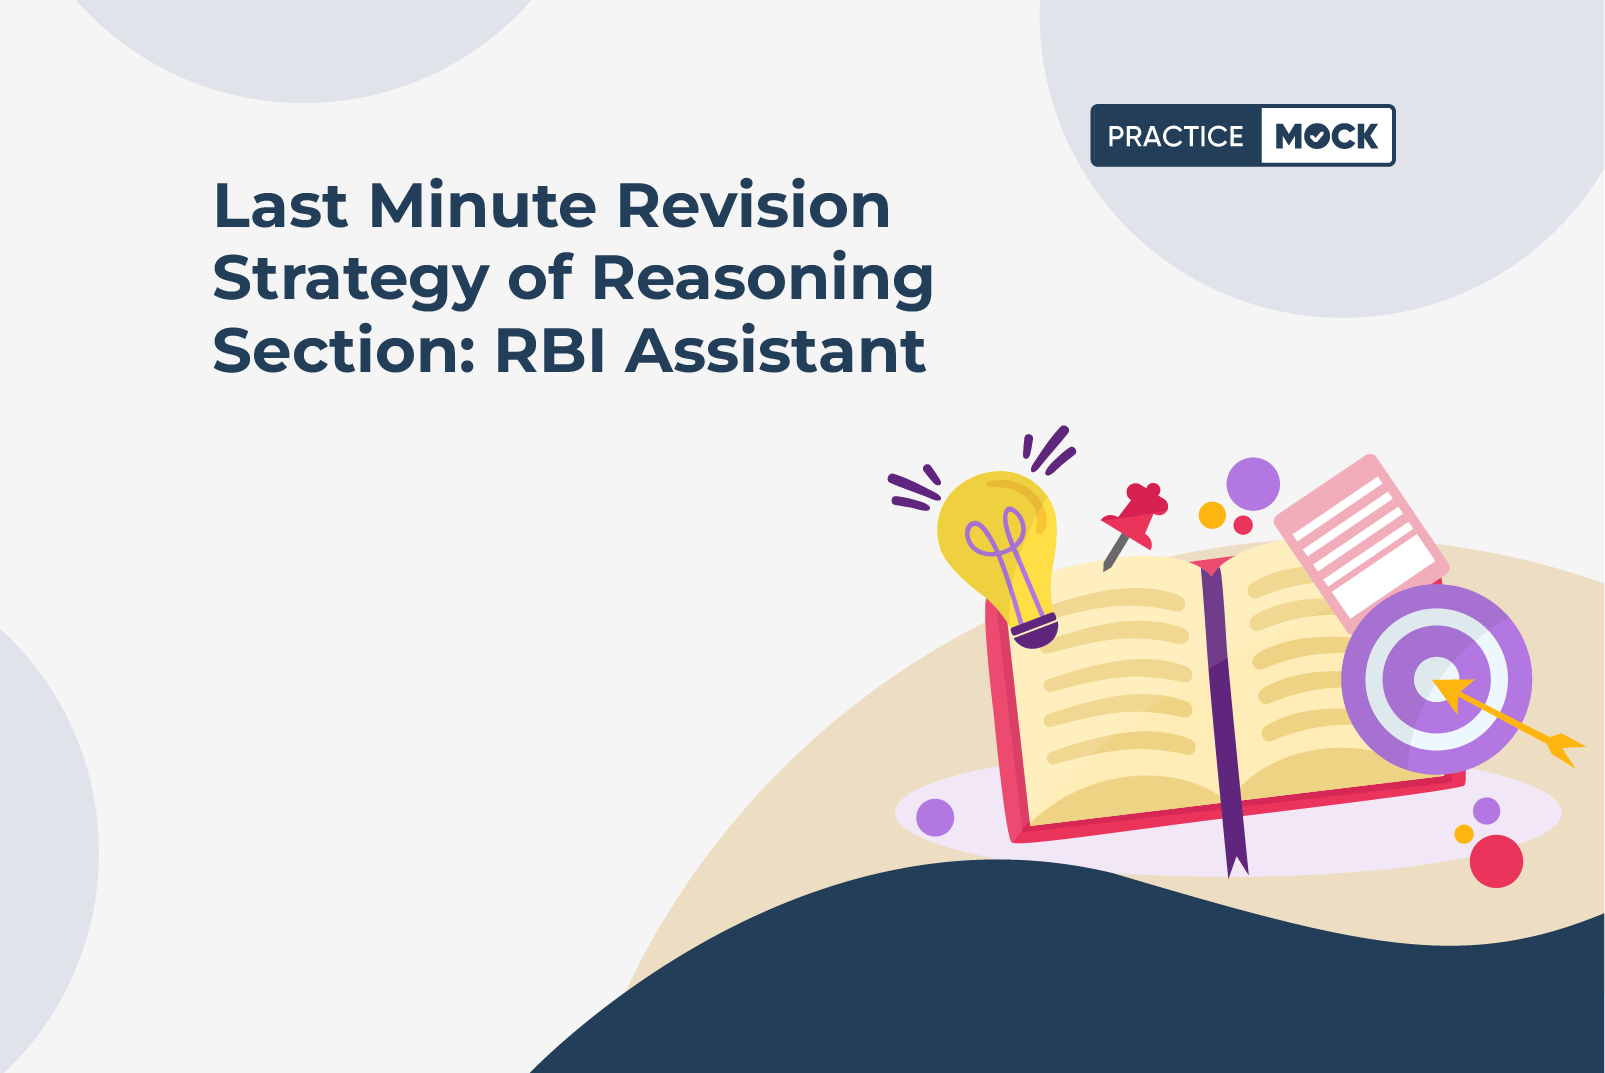 Last Minute Revision Strategy of Reasoning Section RBI Assistant (1)